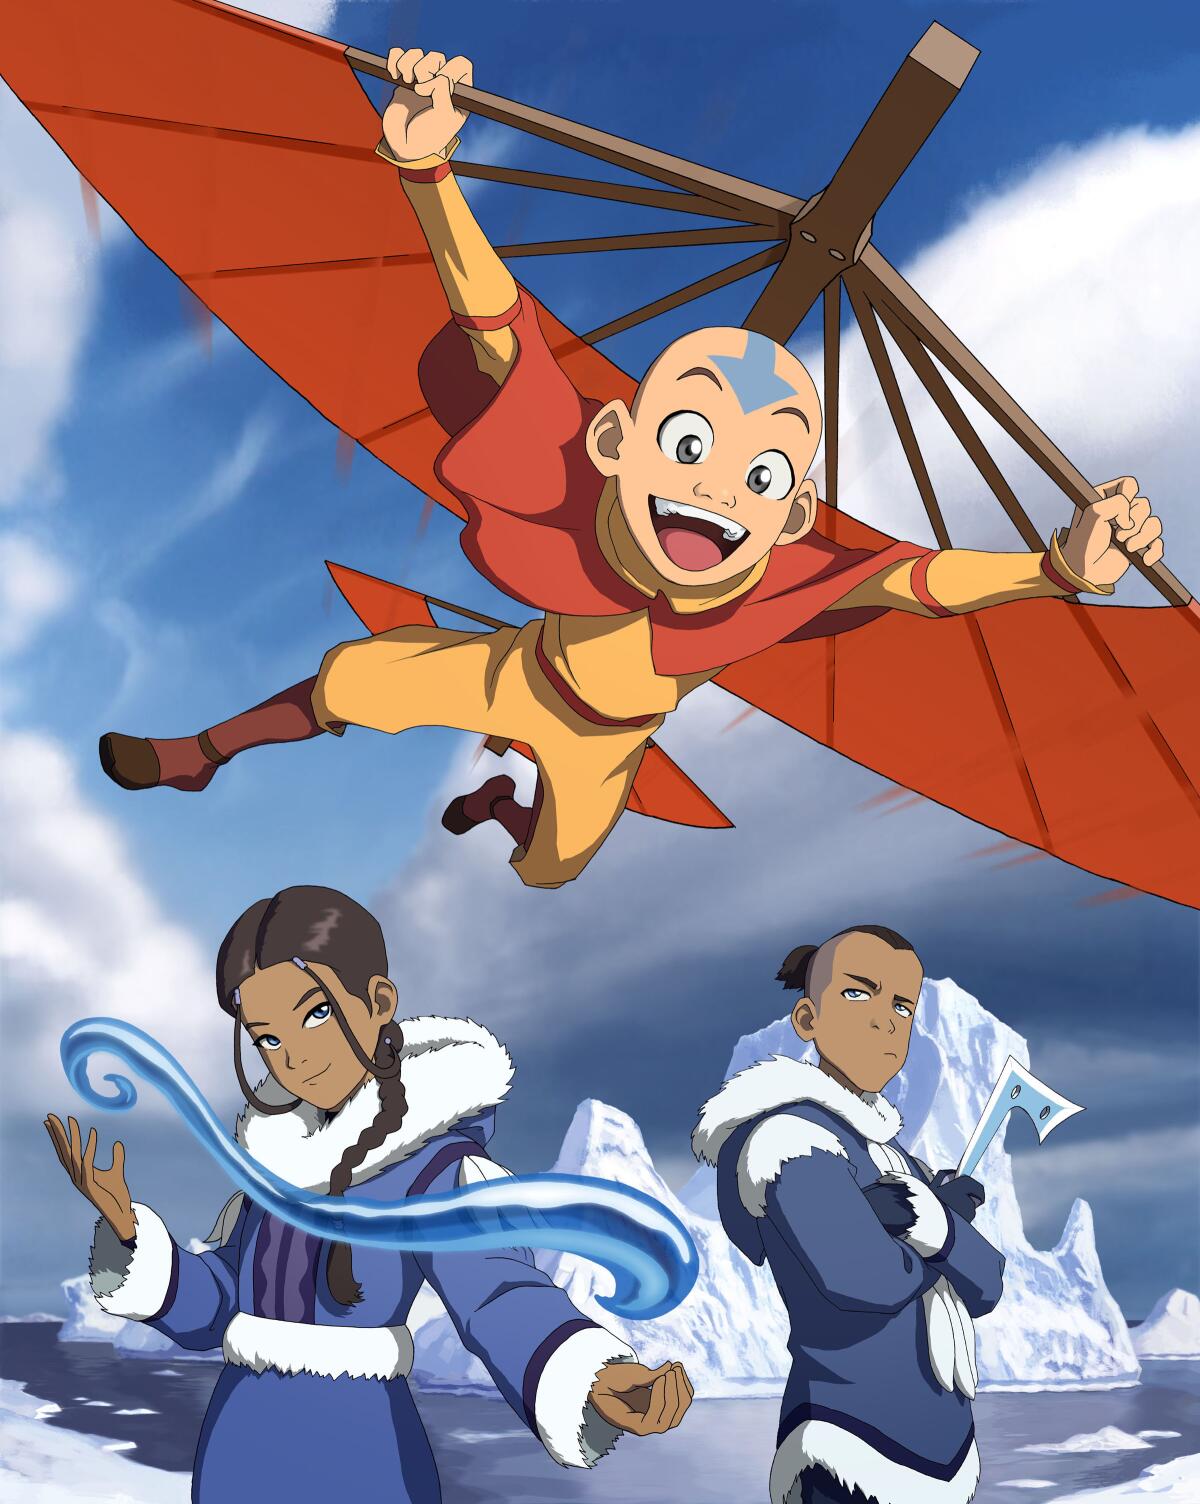 Katara, a young Waterbender and her warrior brother Sokka rescue a boy, Aang, from a cavernous iceberg.